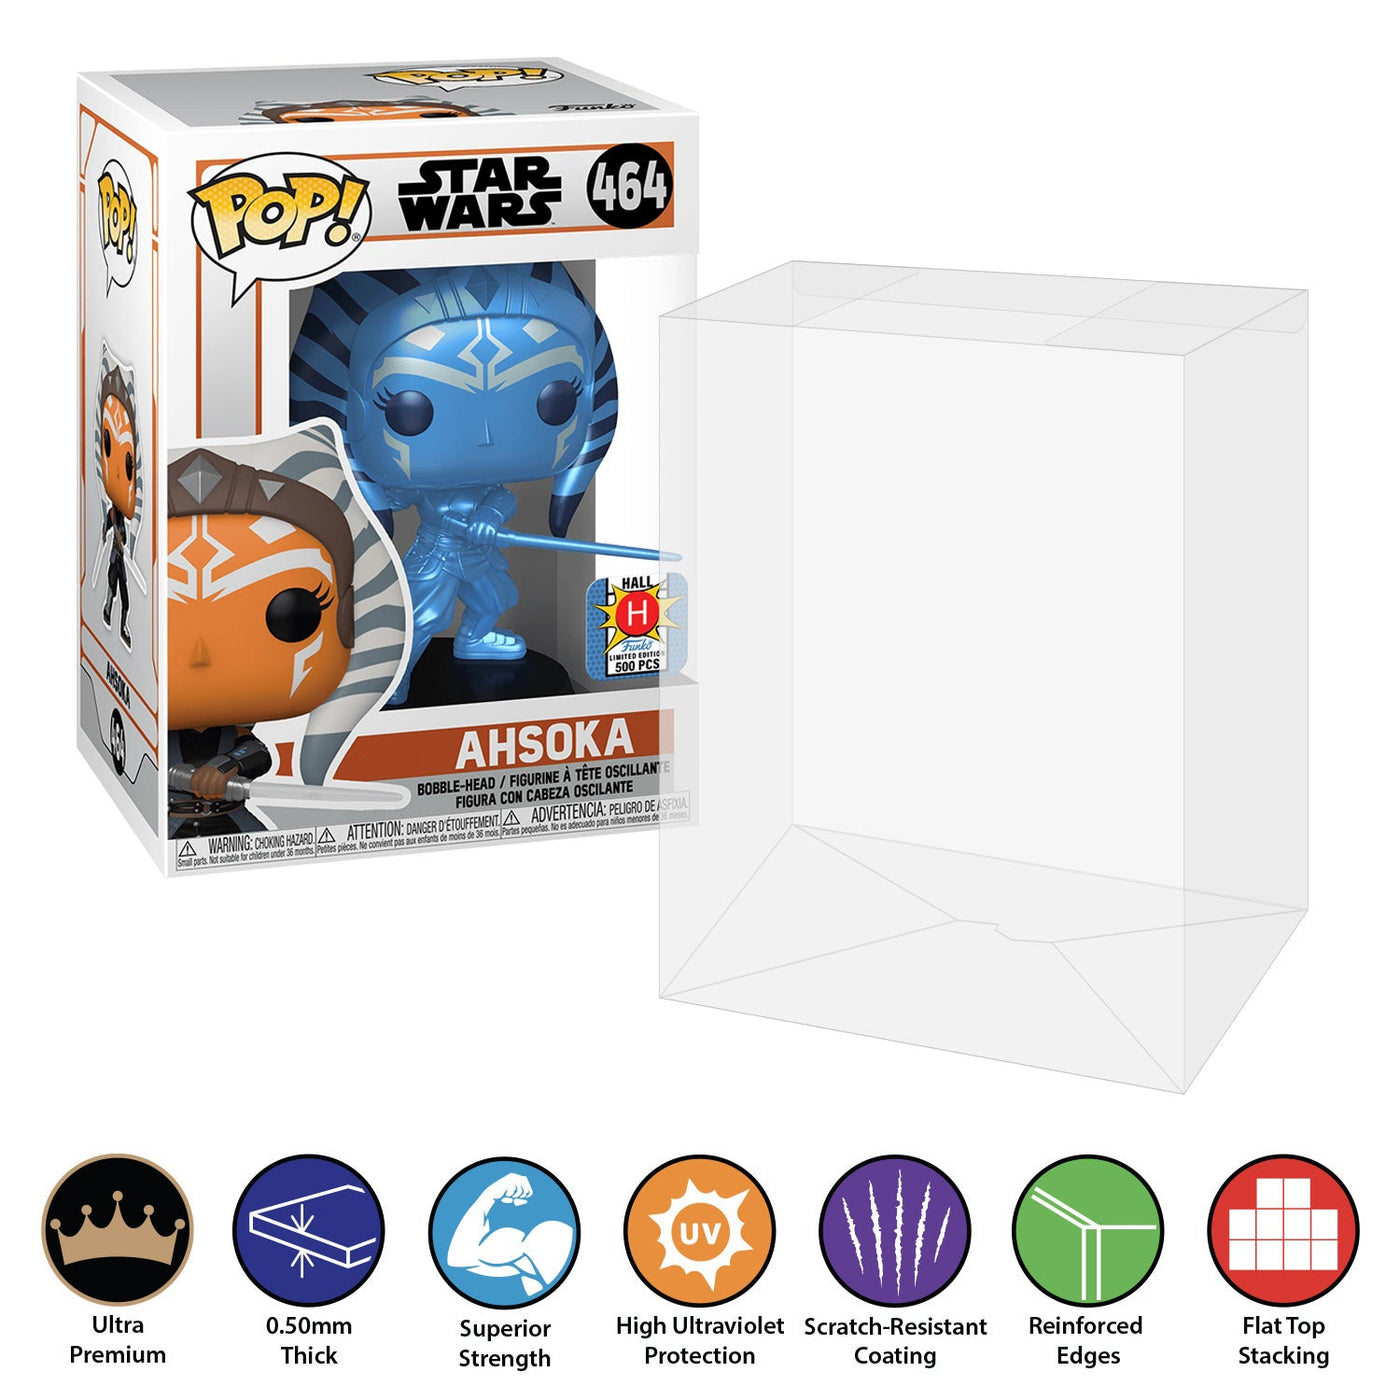 funko pop ahsoka hall h protector thick strong 50mm uv scratch flat top stack vinyl 4 inch standard plastic shield vaulted eco armor fits collect protect display geek case kollector protector